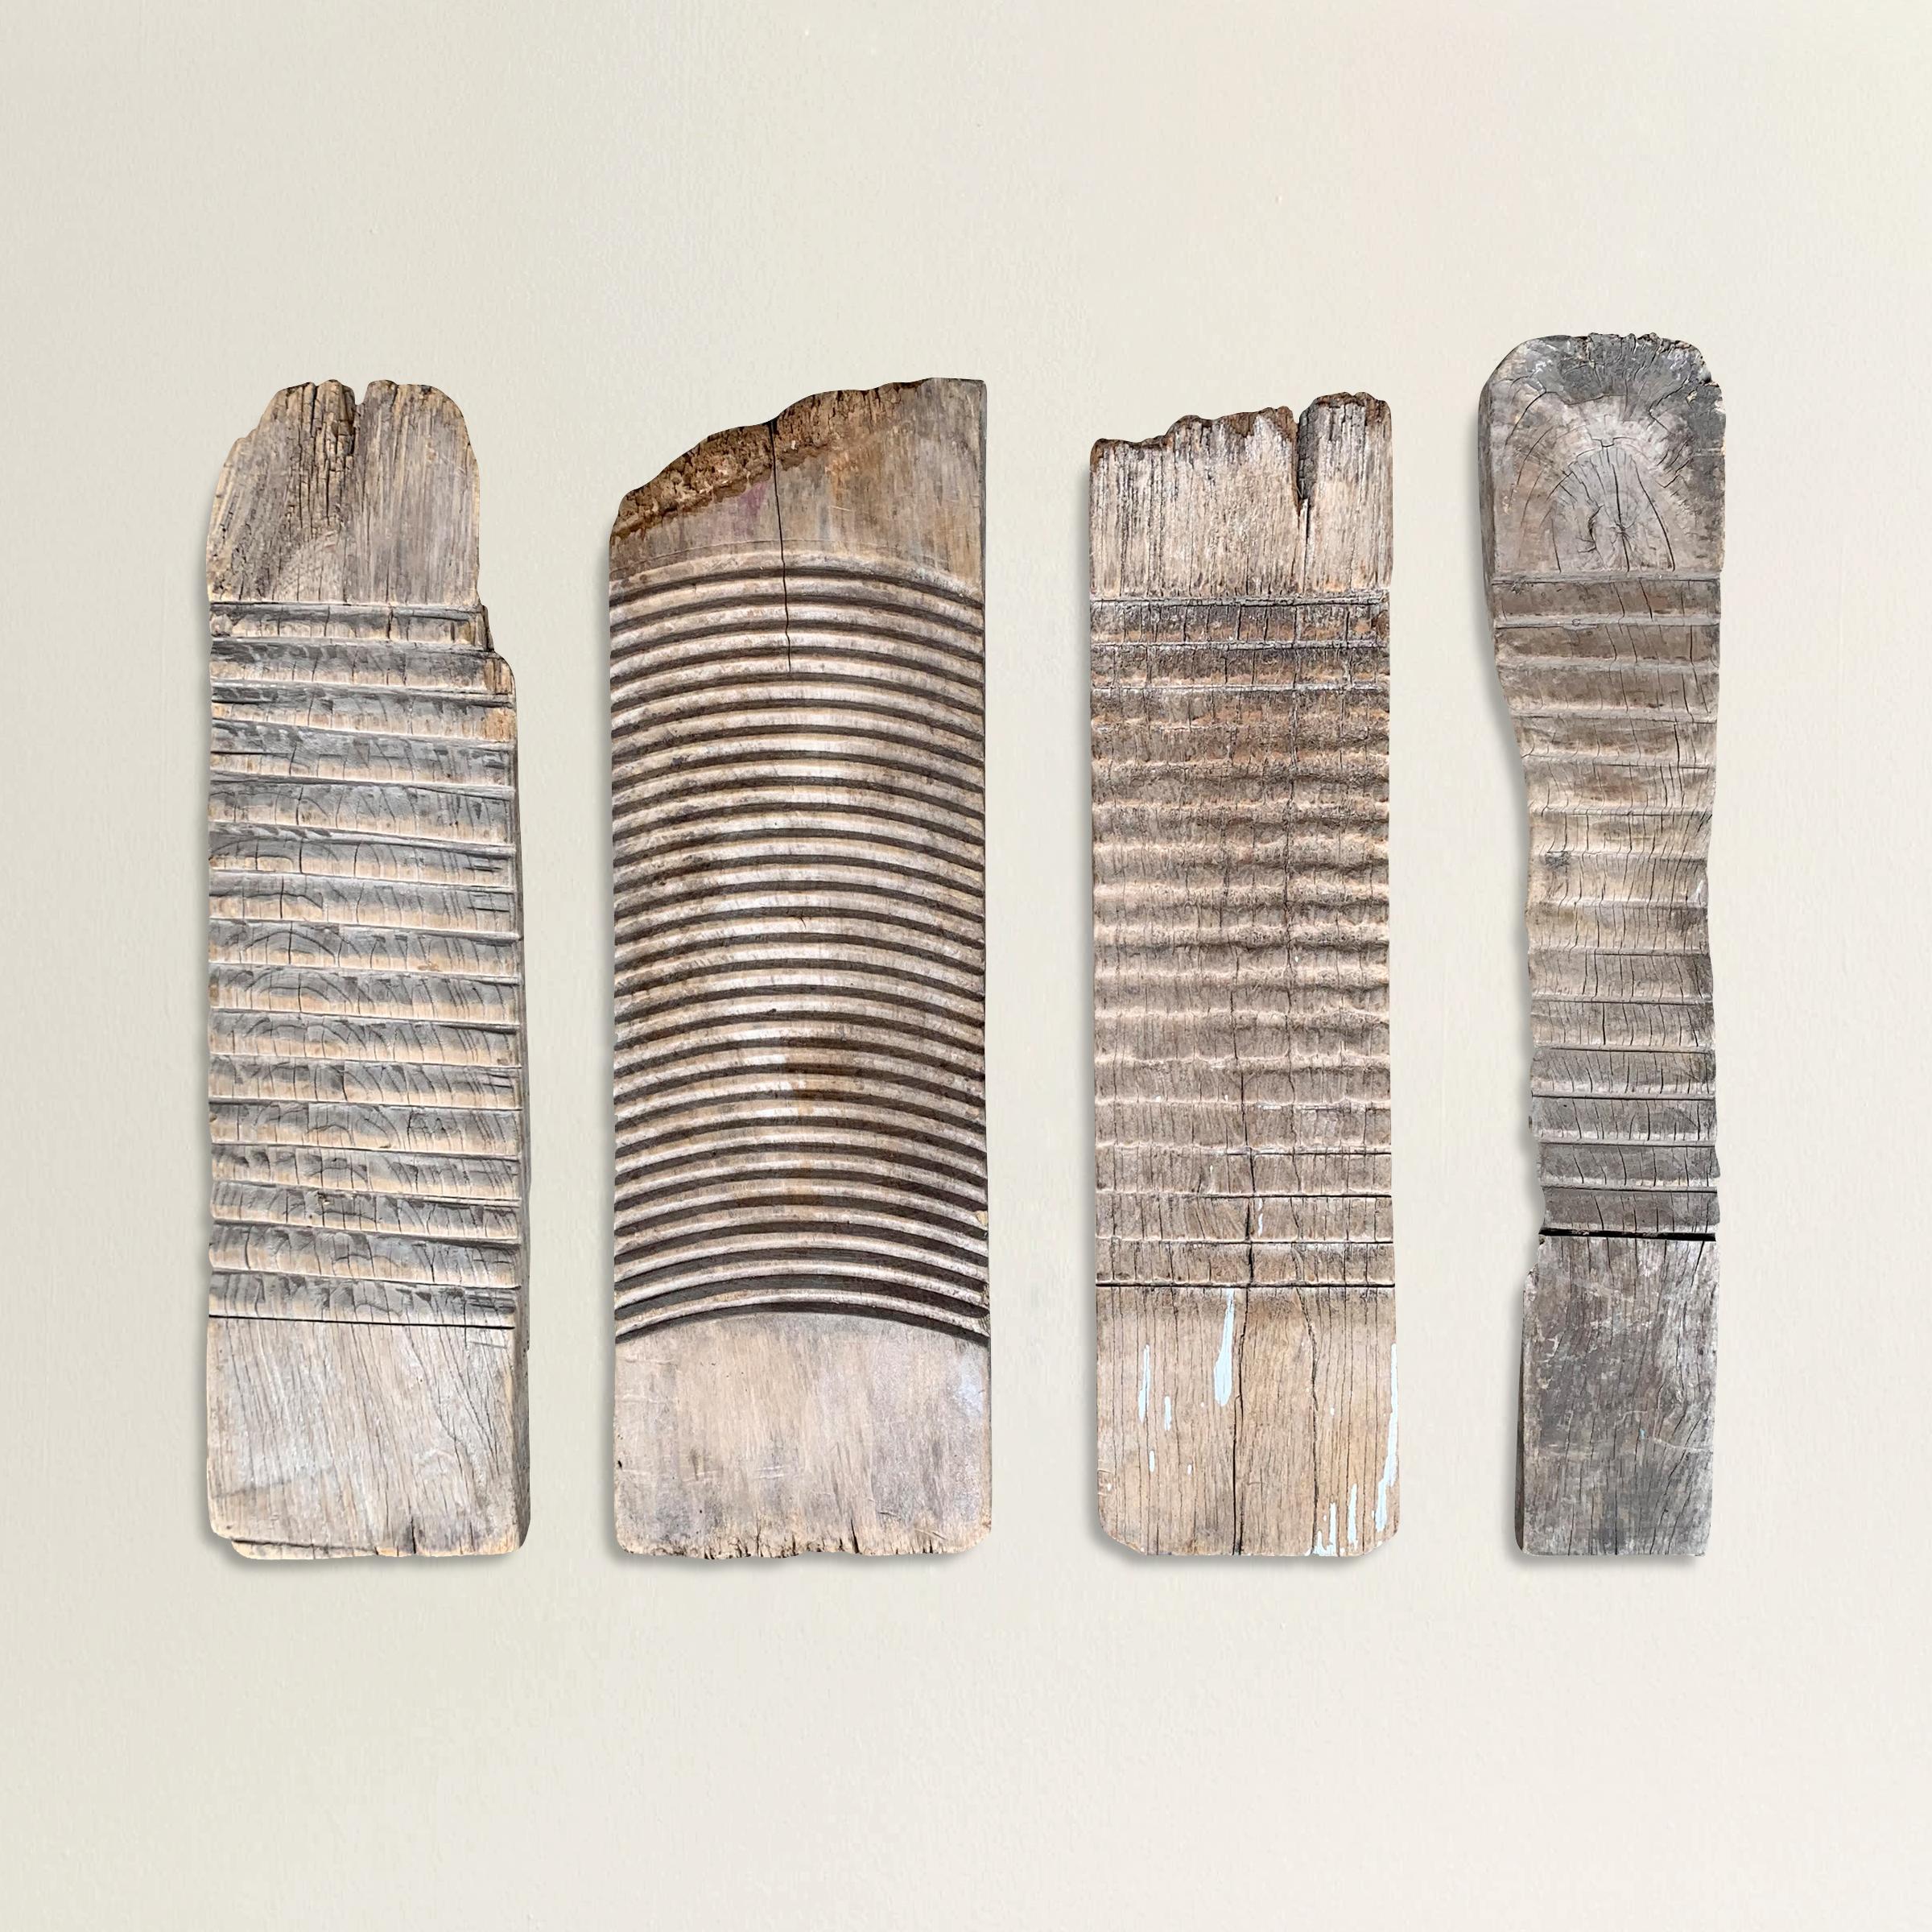 A remarkable set of four 19th century Eastern European carved wood washboards, all with well-worn and smooth driftwood finishes. Mounted on custom wall mounts.